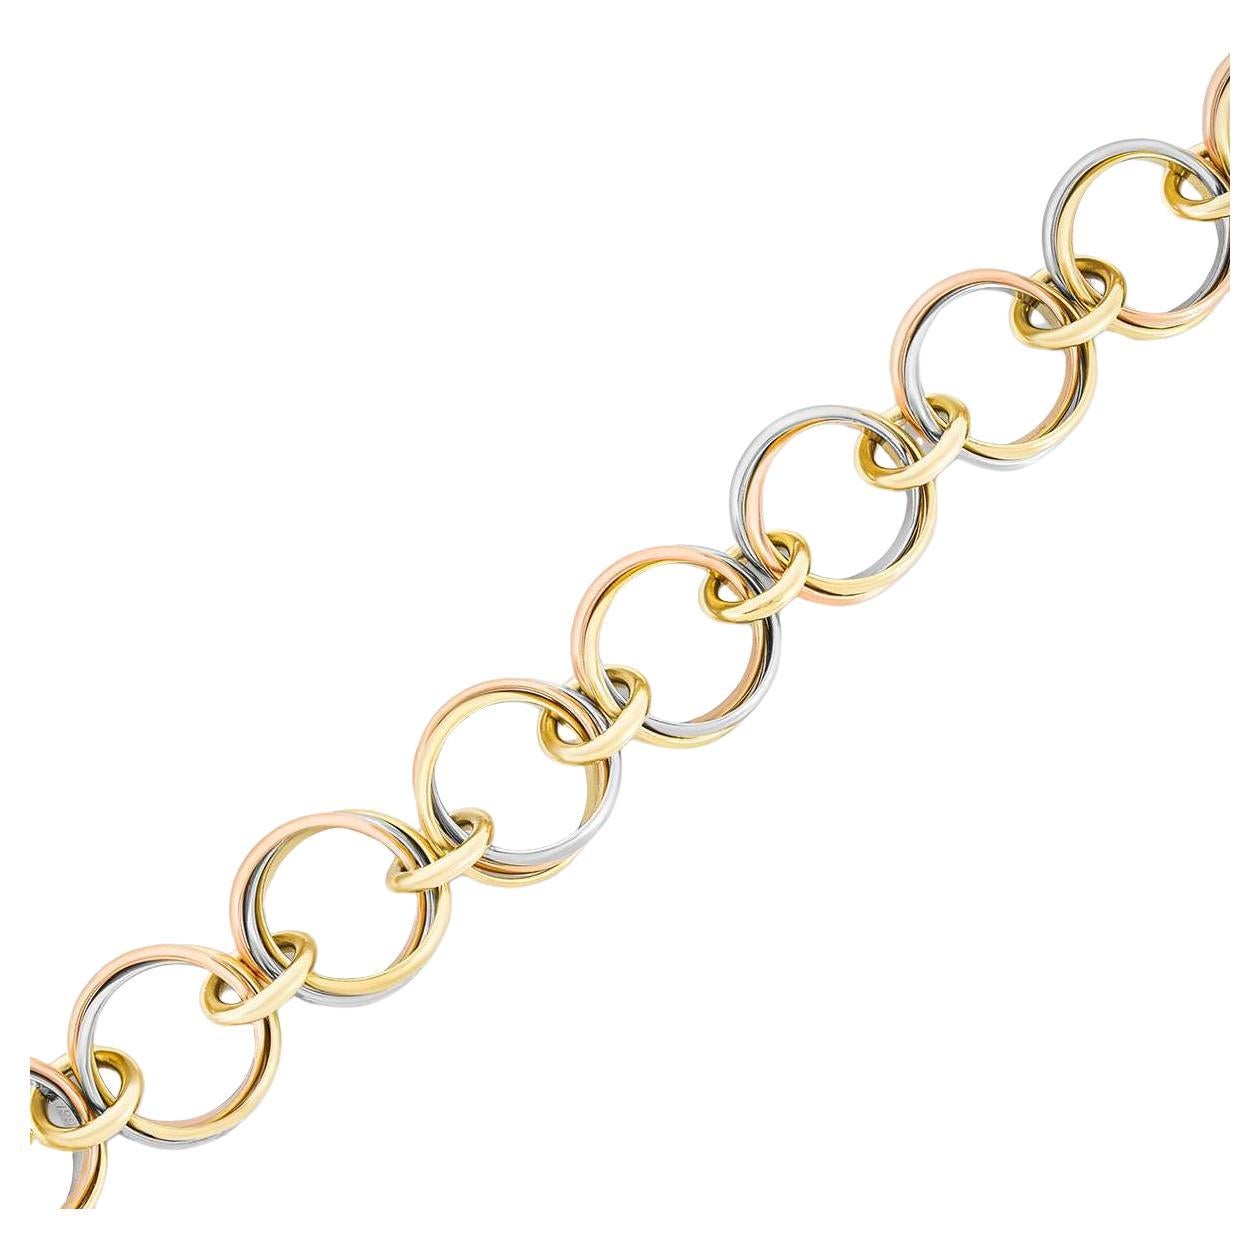 An intricate 18k tri-colour gold link bracelet by Cartier from the Trinity collection. The bracelet consists of 10 stations of intertwined 18k white, rose and yellow gold circular motifs joined by nine yellow gold links. The 7.5inch long bracelet